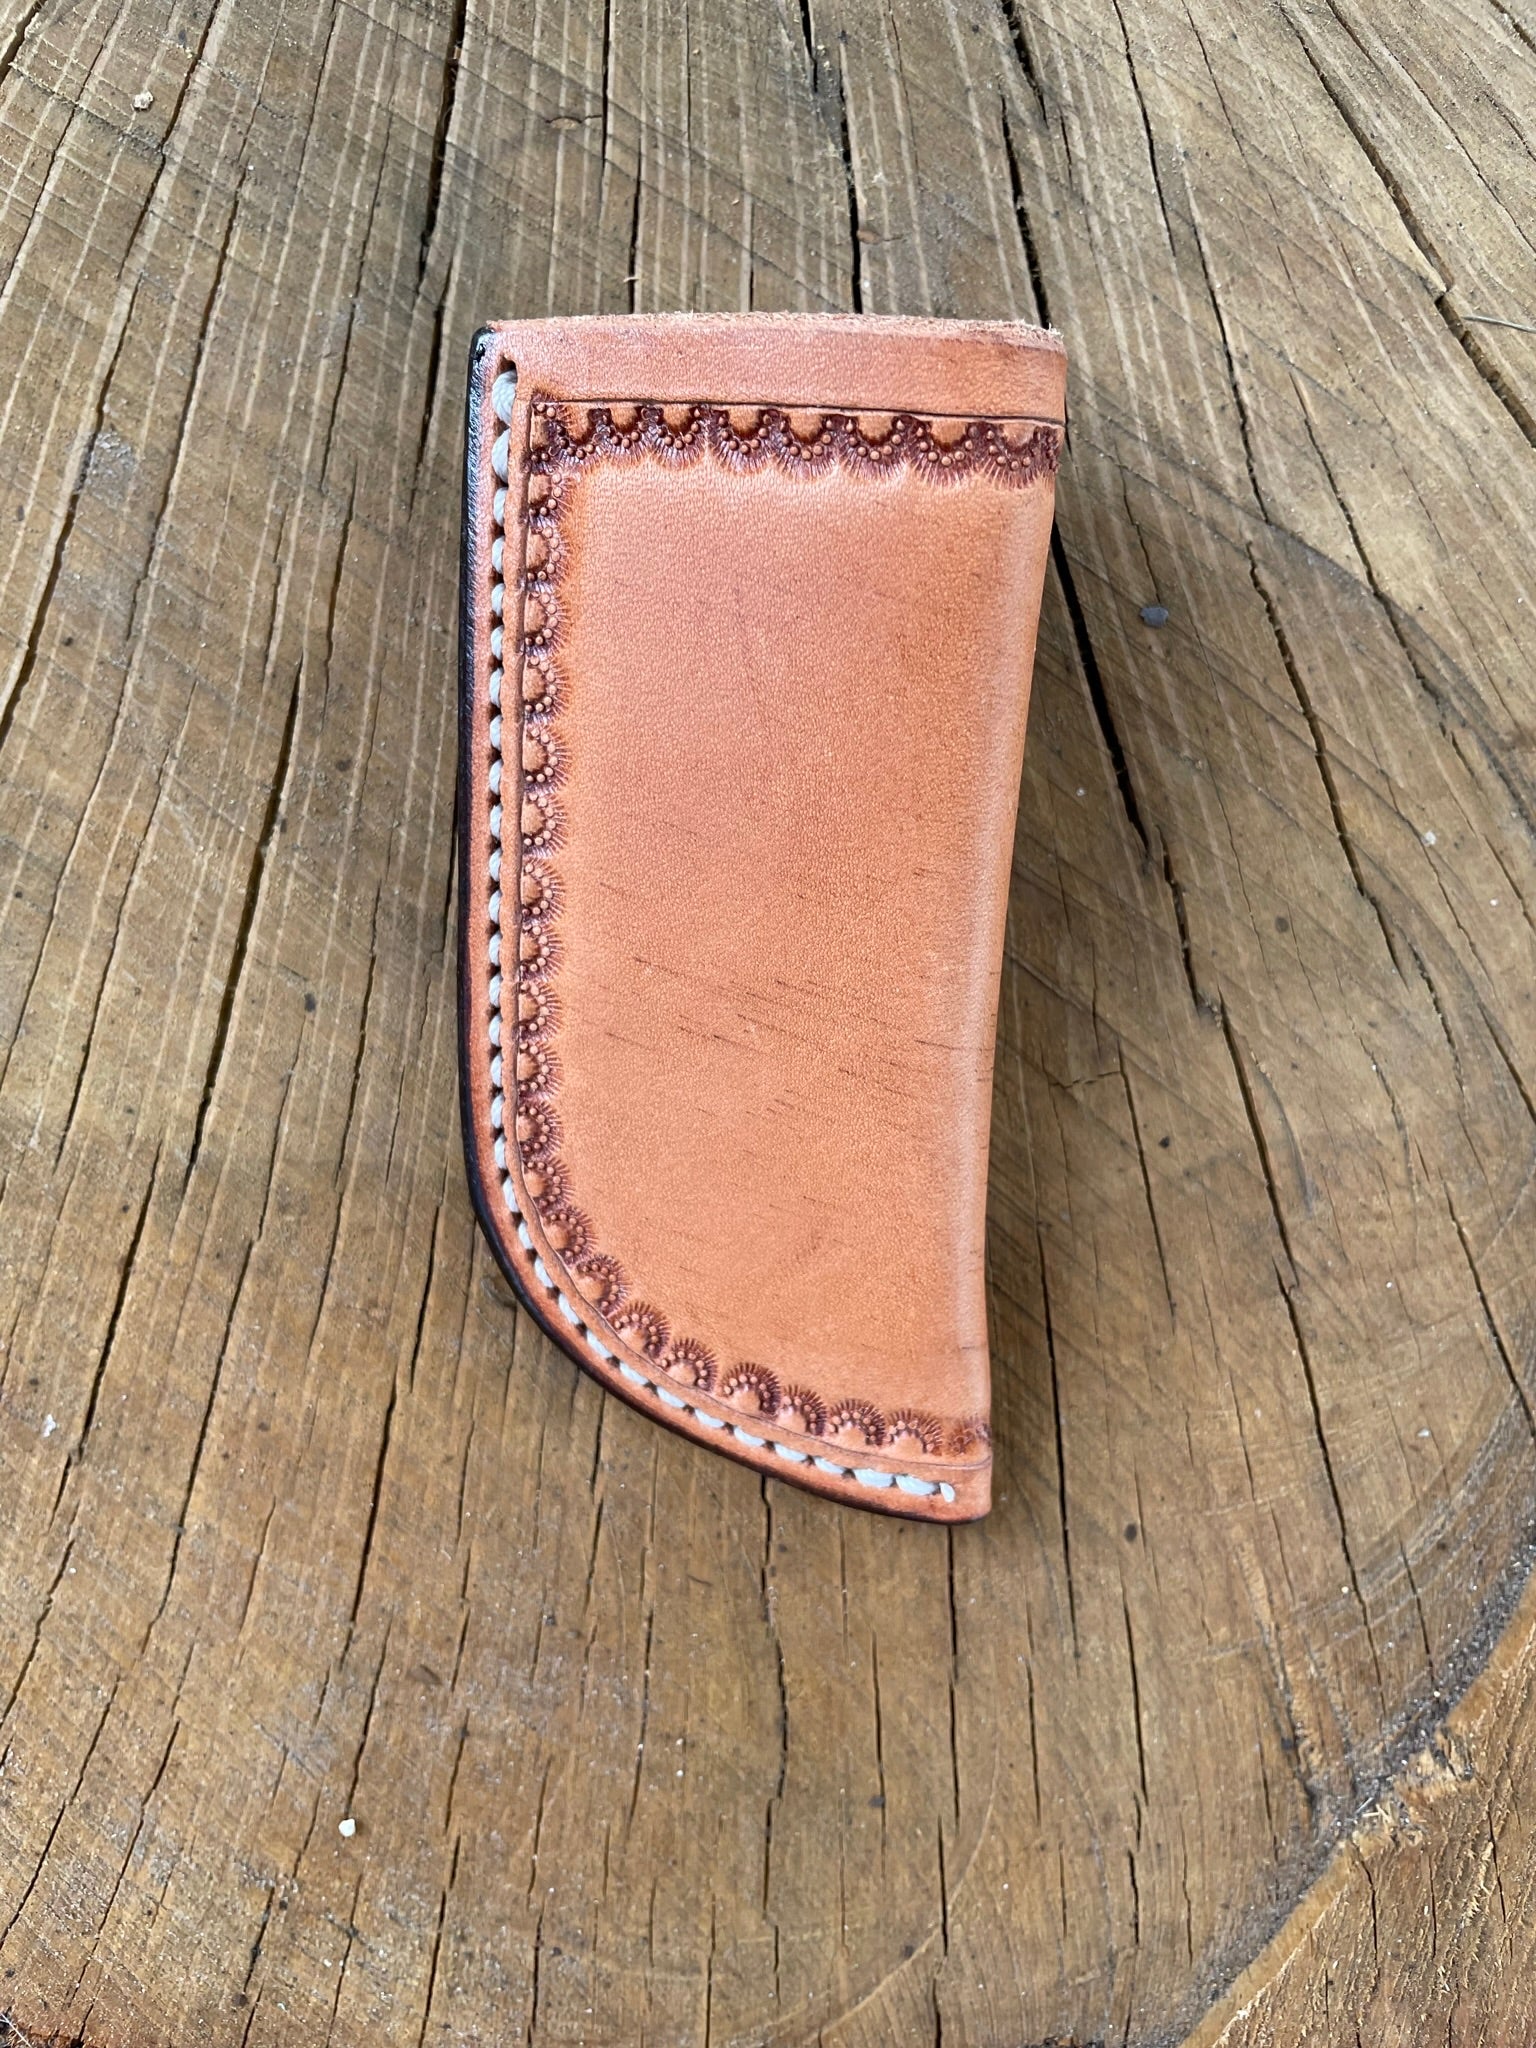 Knife Scabbard – Steele Creek Tack and Supplies